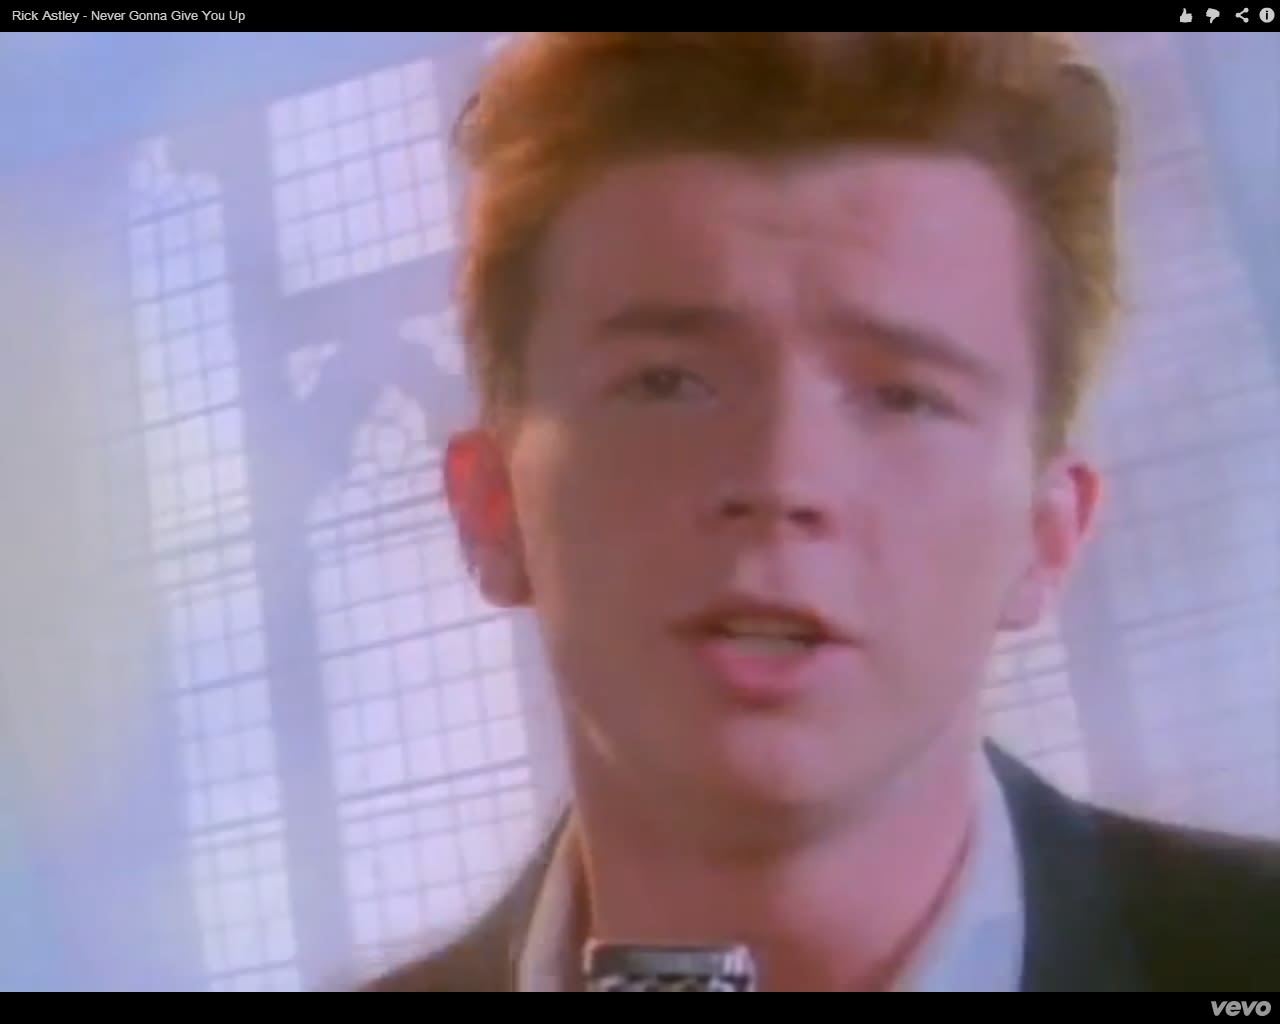 Vine gets 'Rickrolled' by 16-year-old